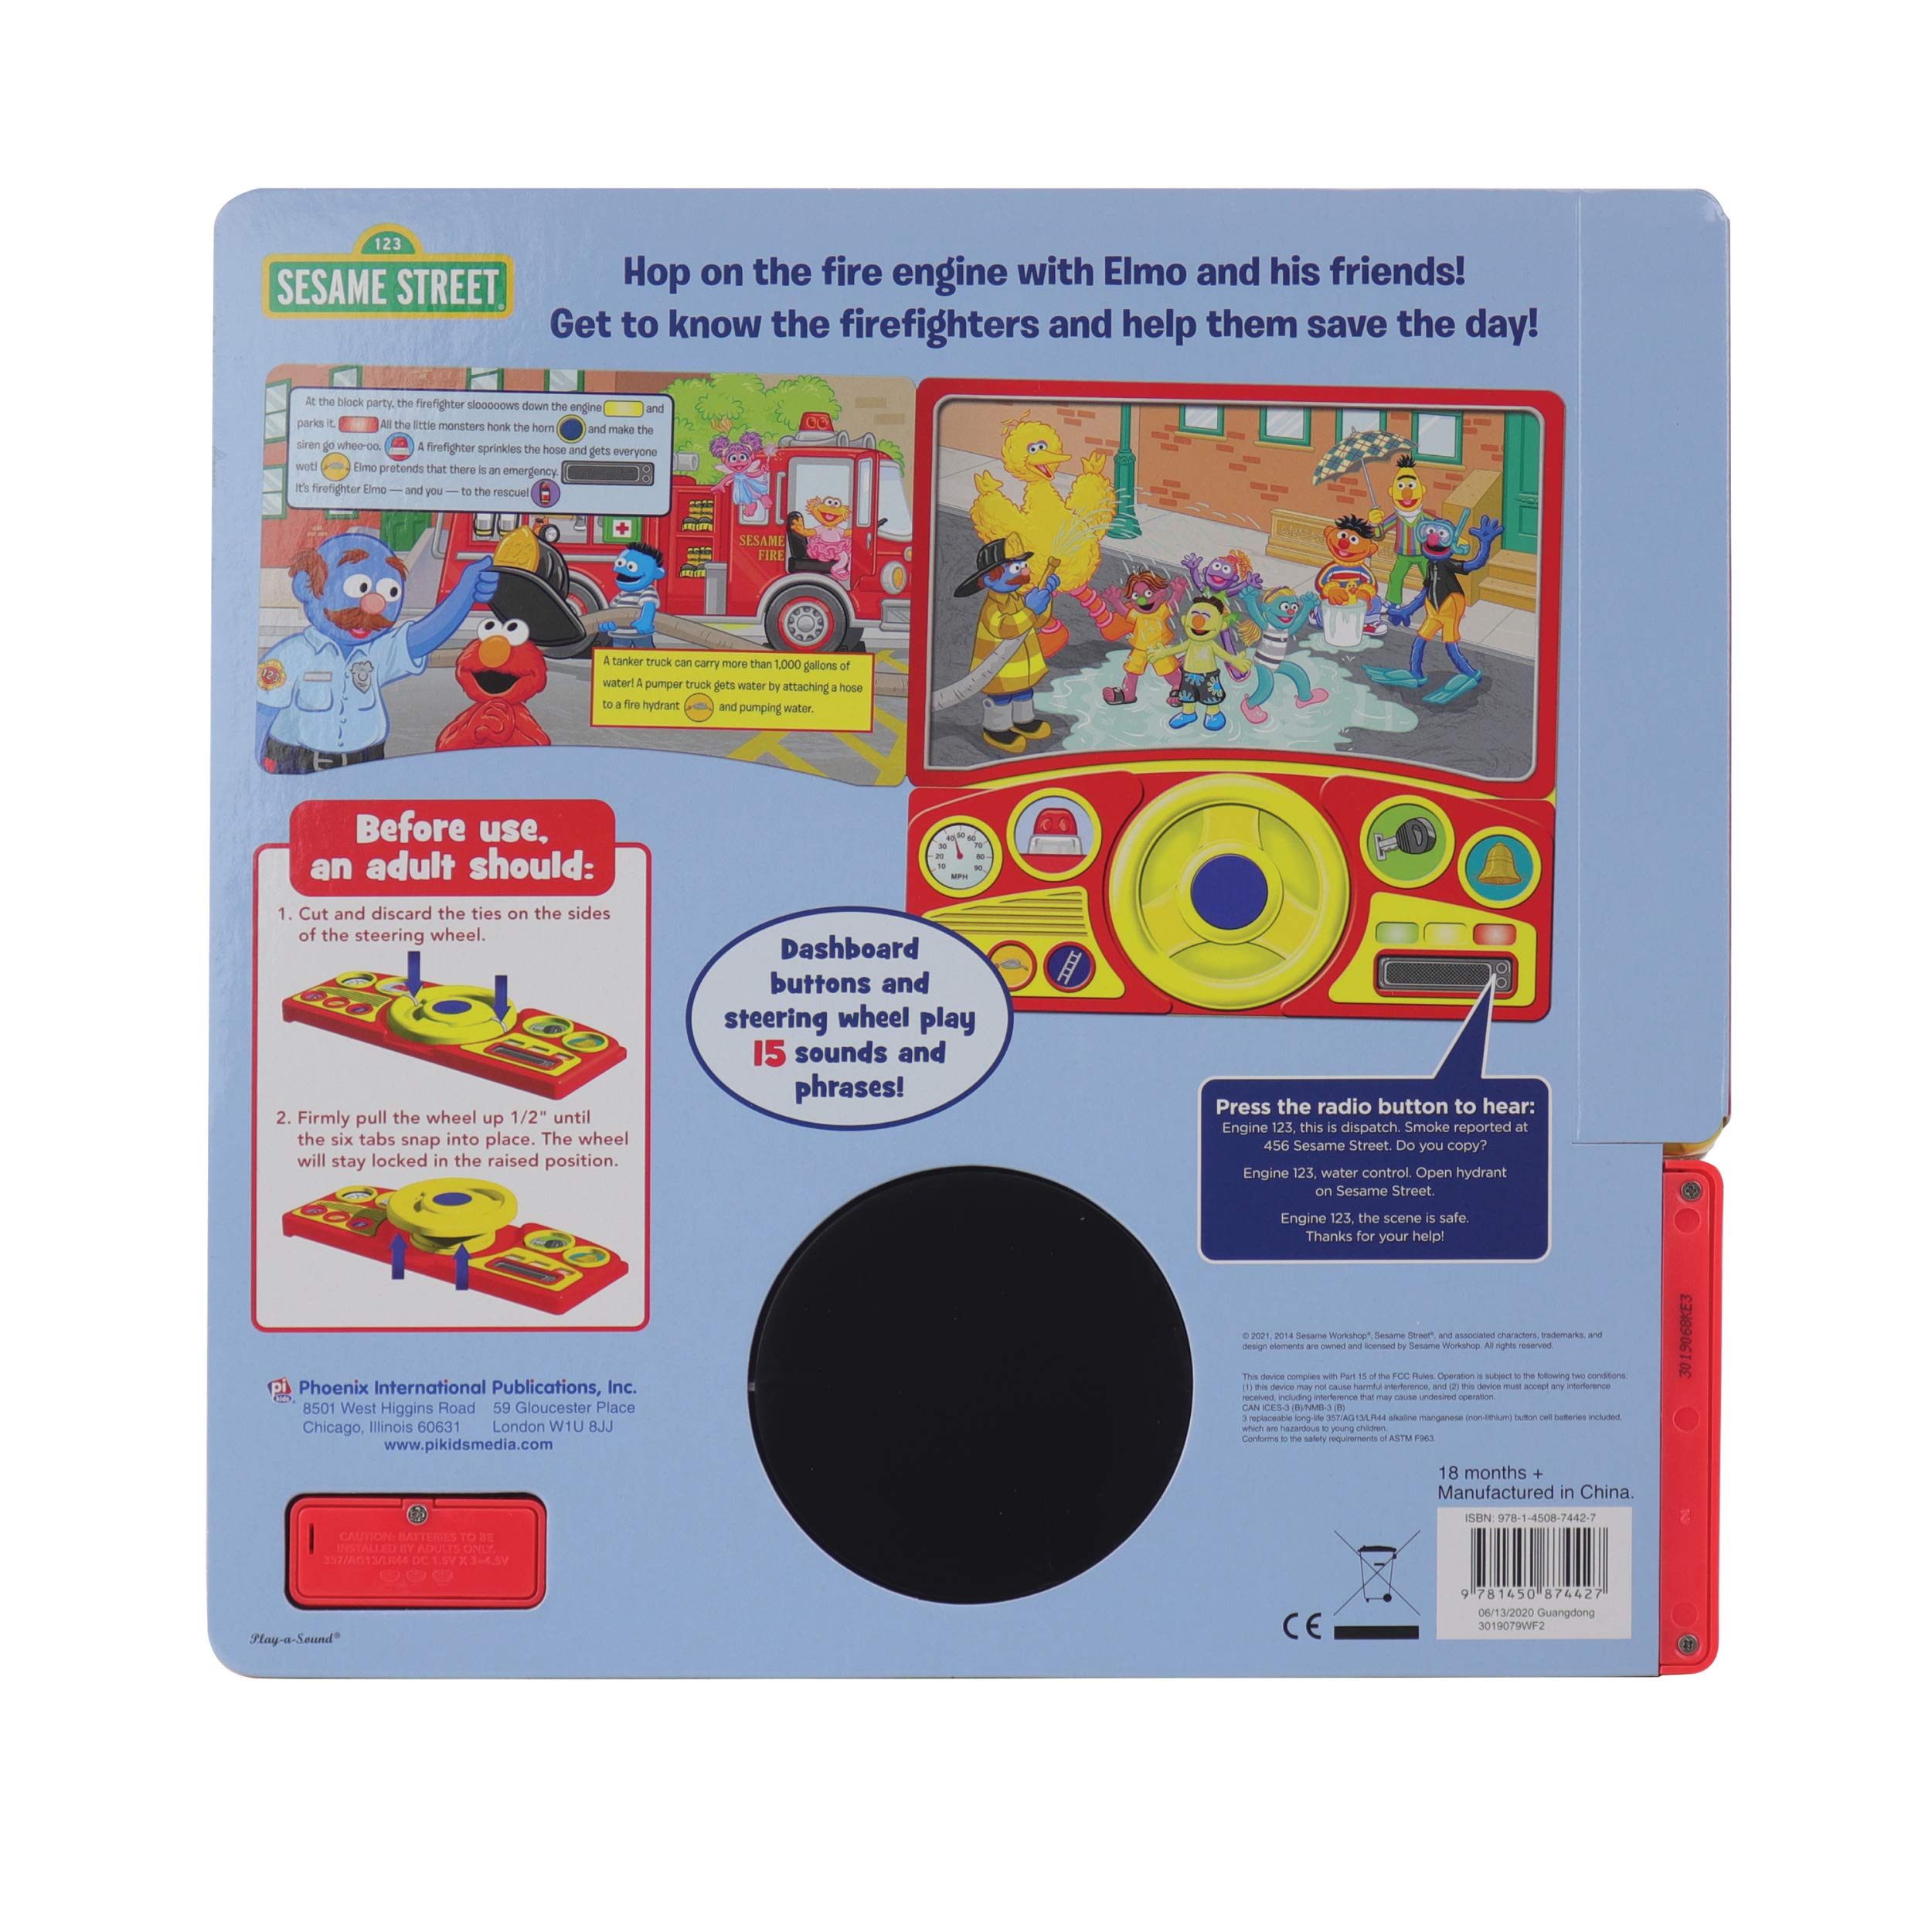 Sesame Street - Elmo's Big Fire Truck Adventure - Sound Book with Interactive Toy Steering Wheel - PI Kids (Play-A-Sound)